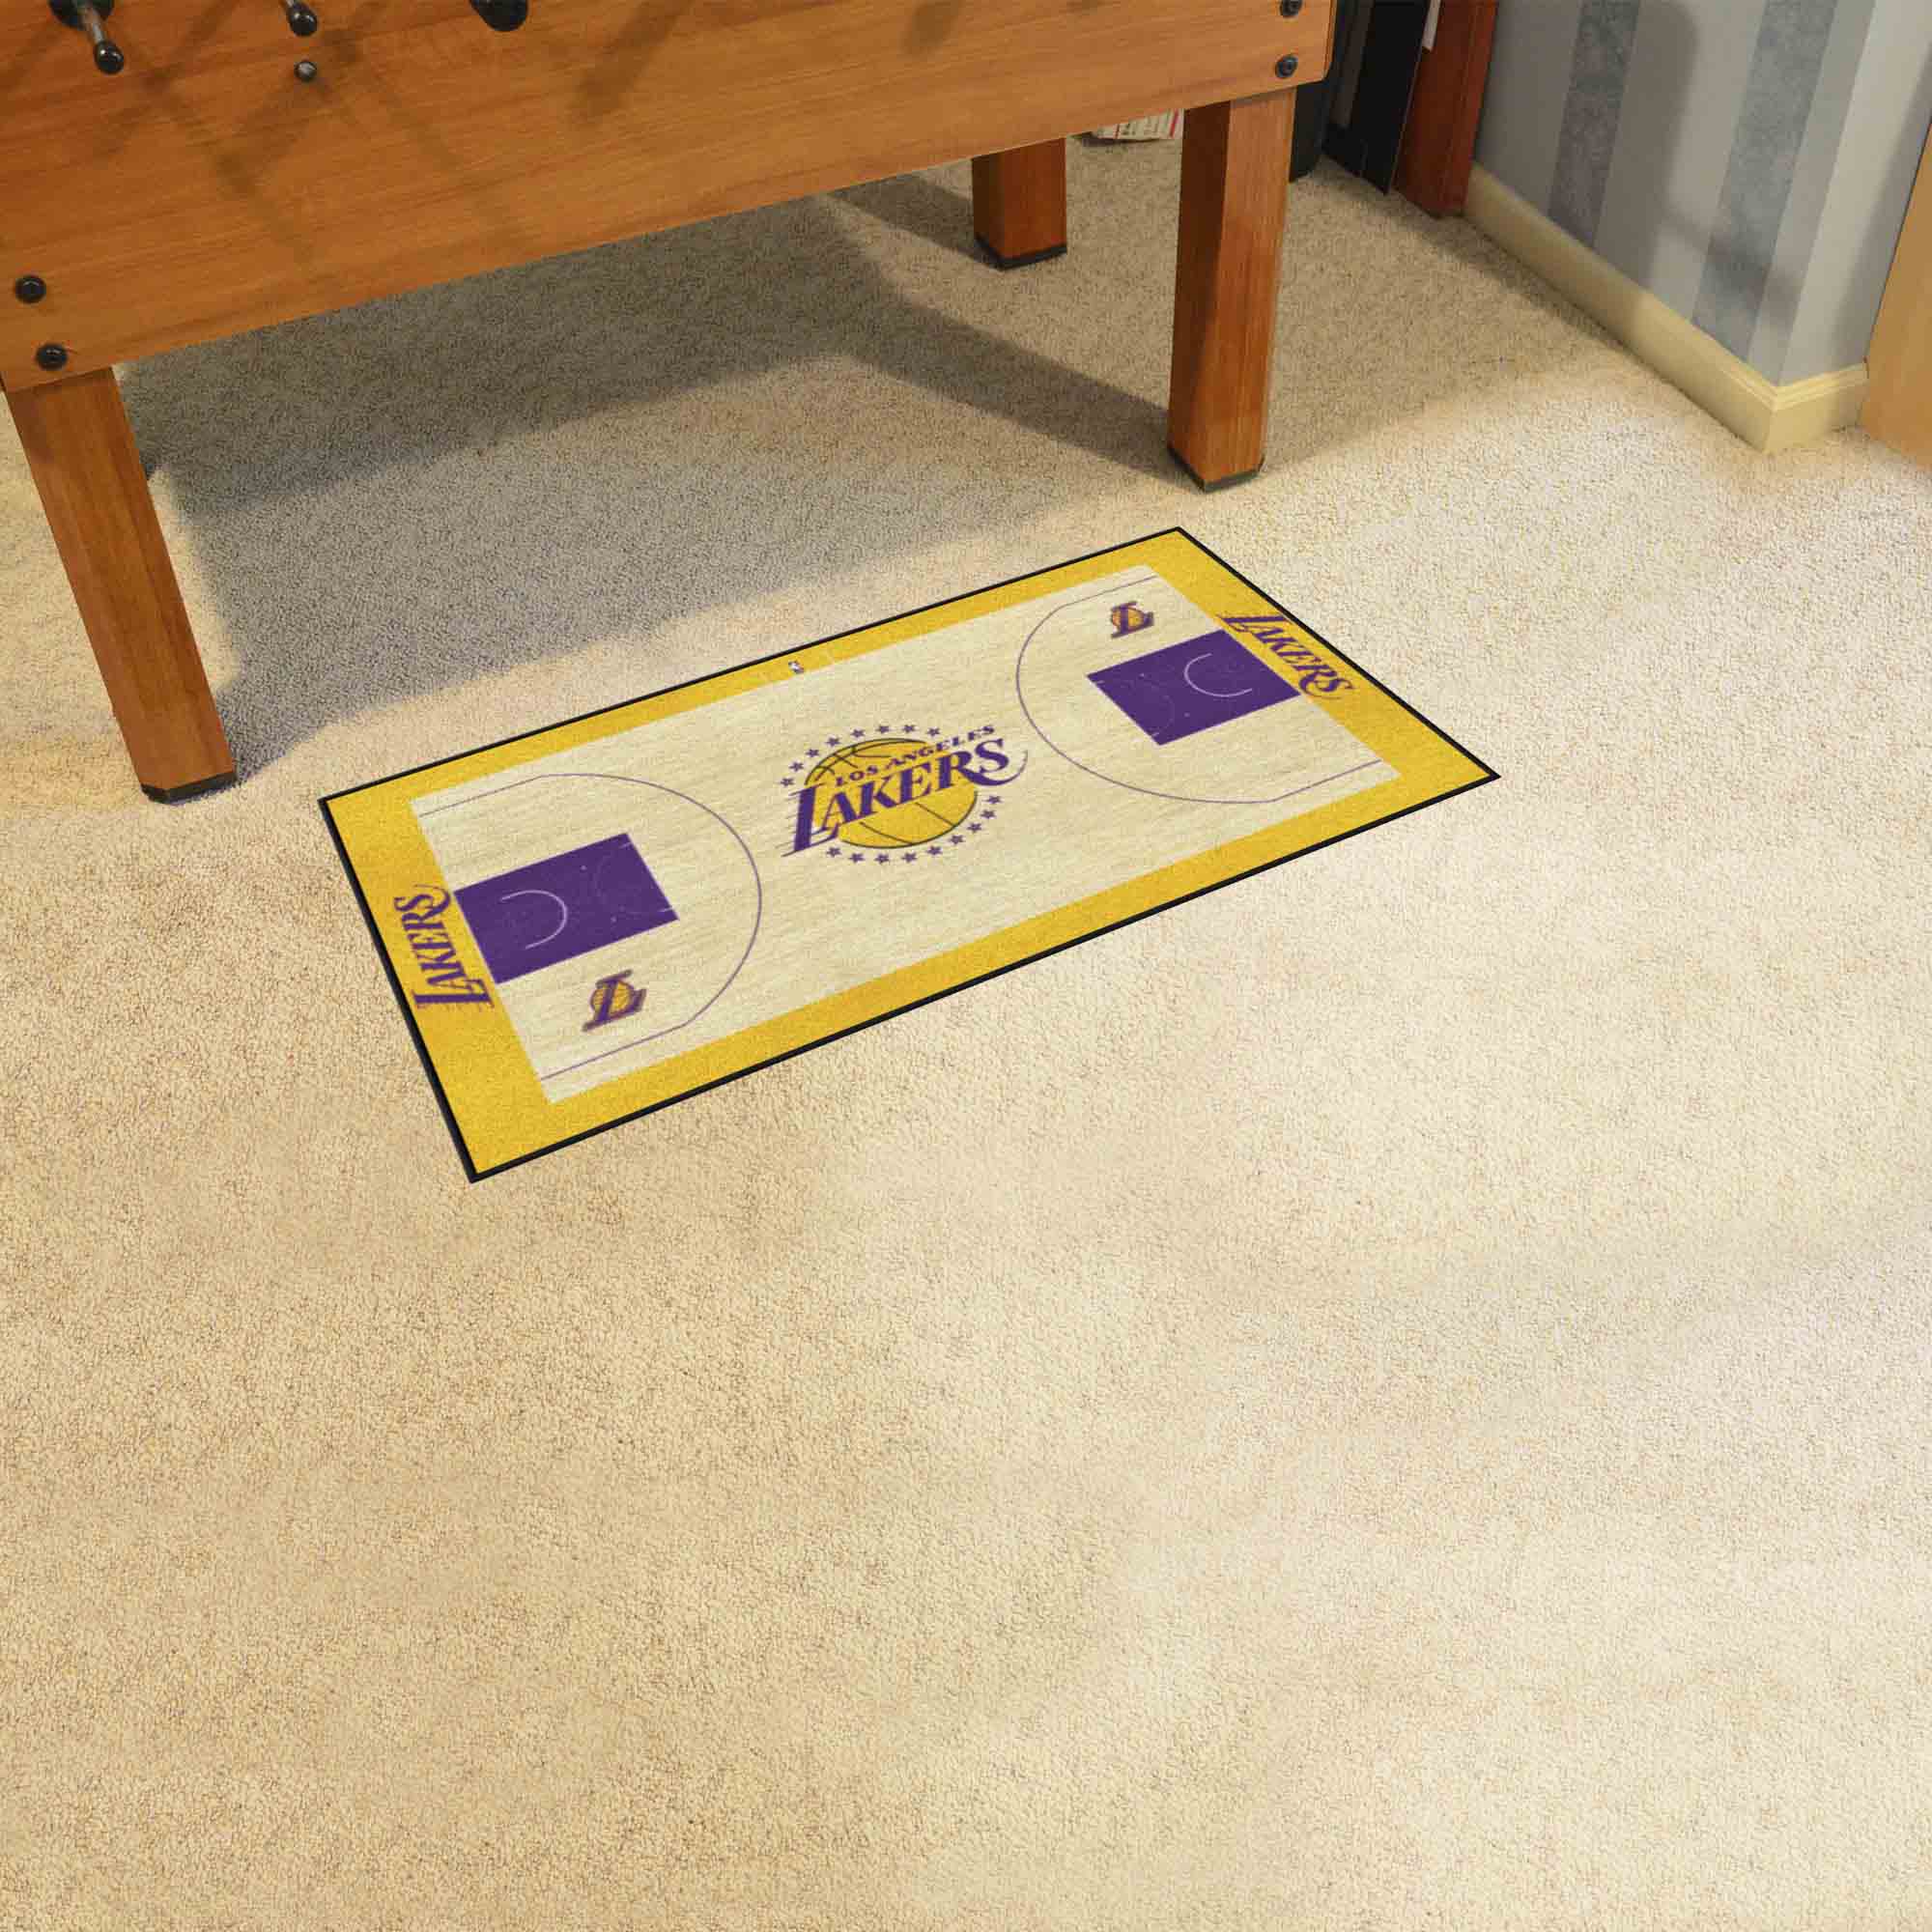 Los Angeles Lakers Basketball Court Runner Mat - 24 x 44